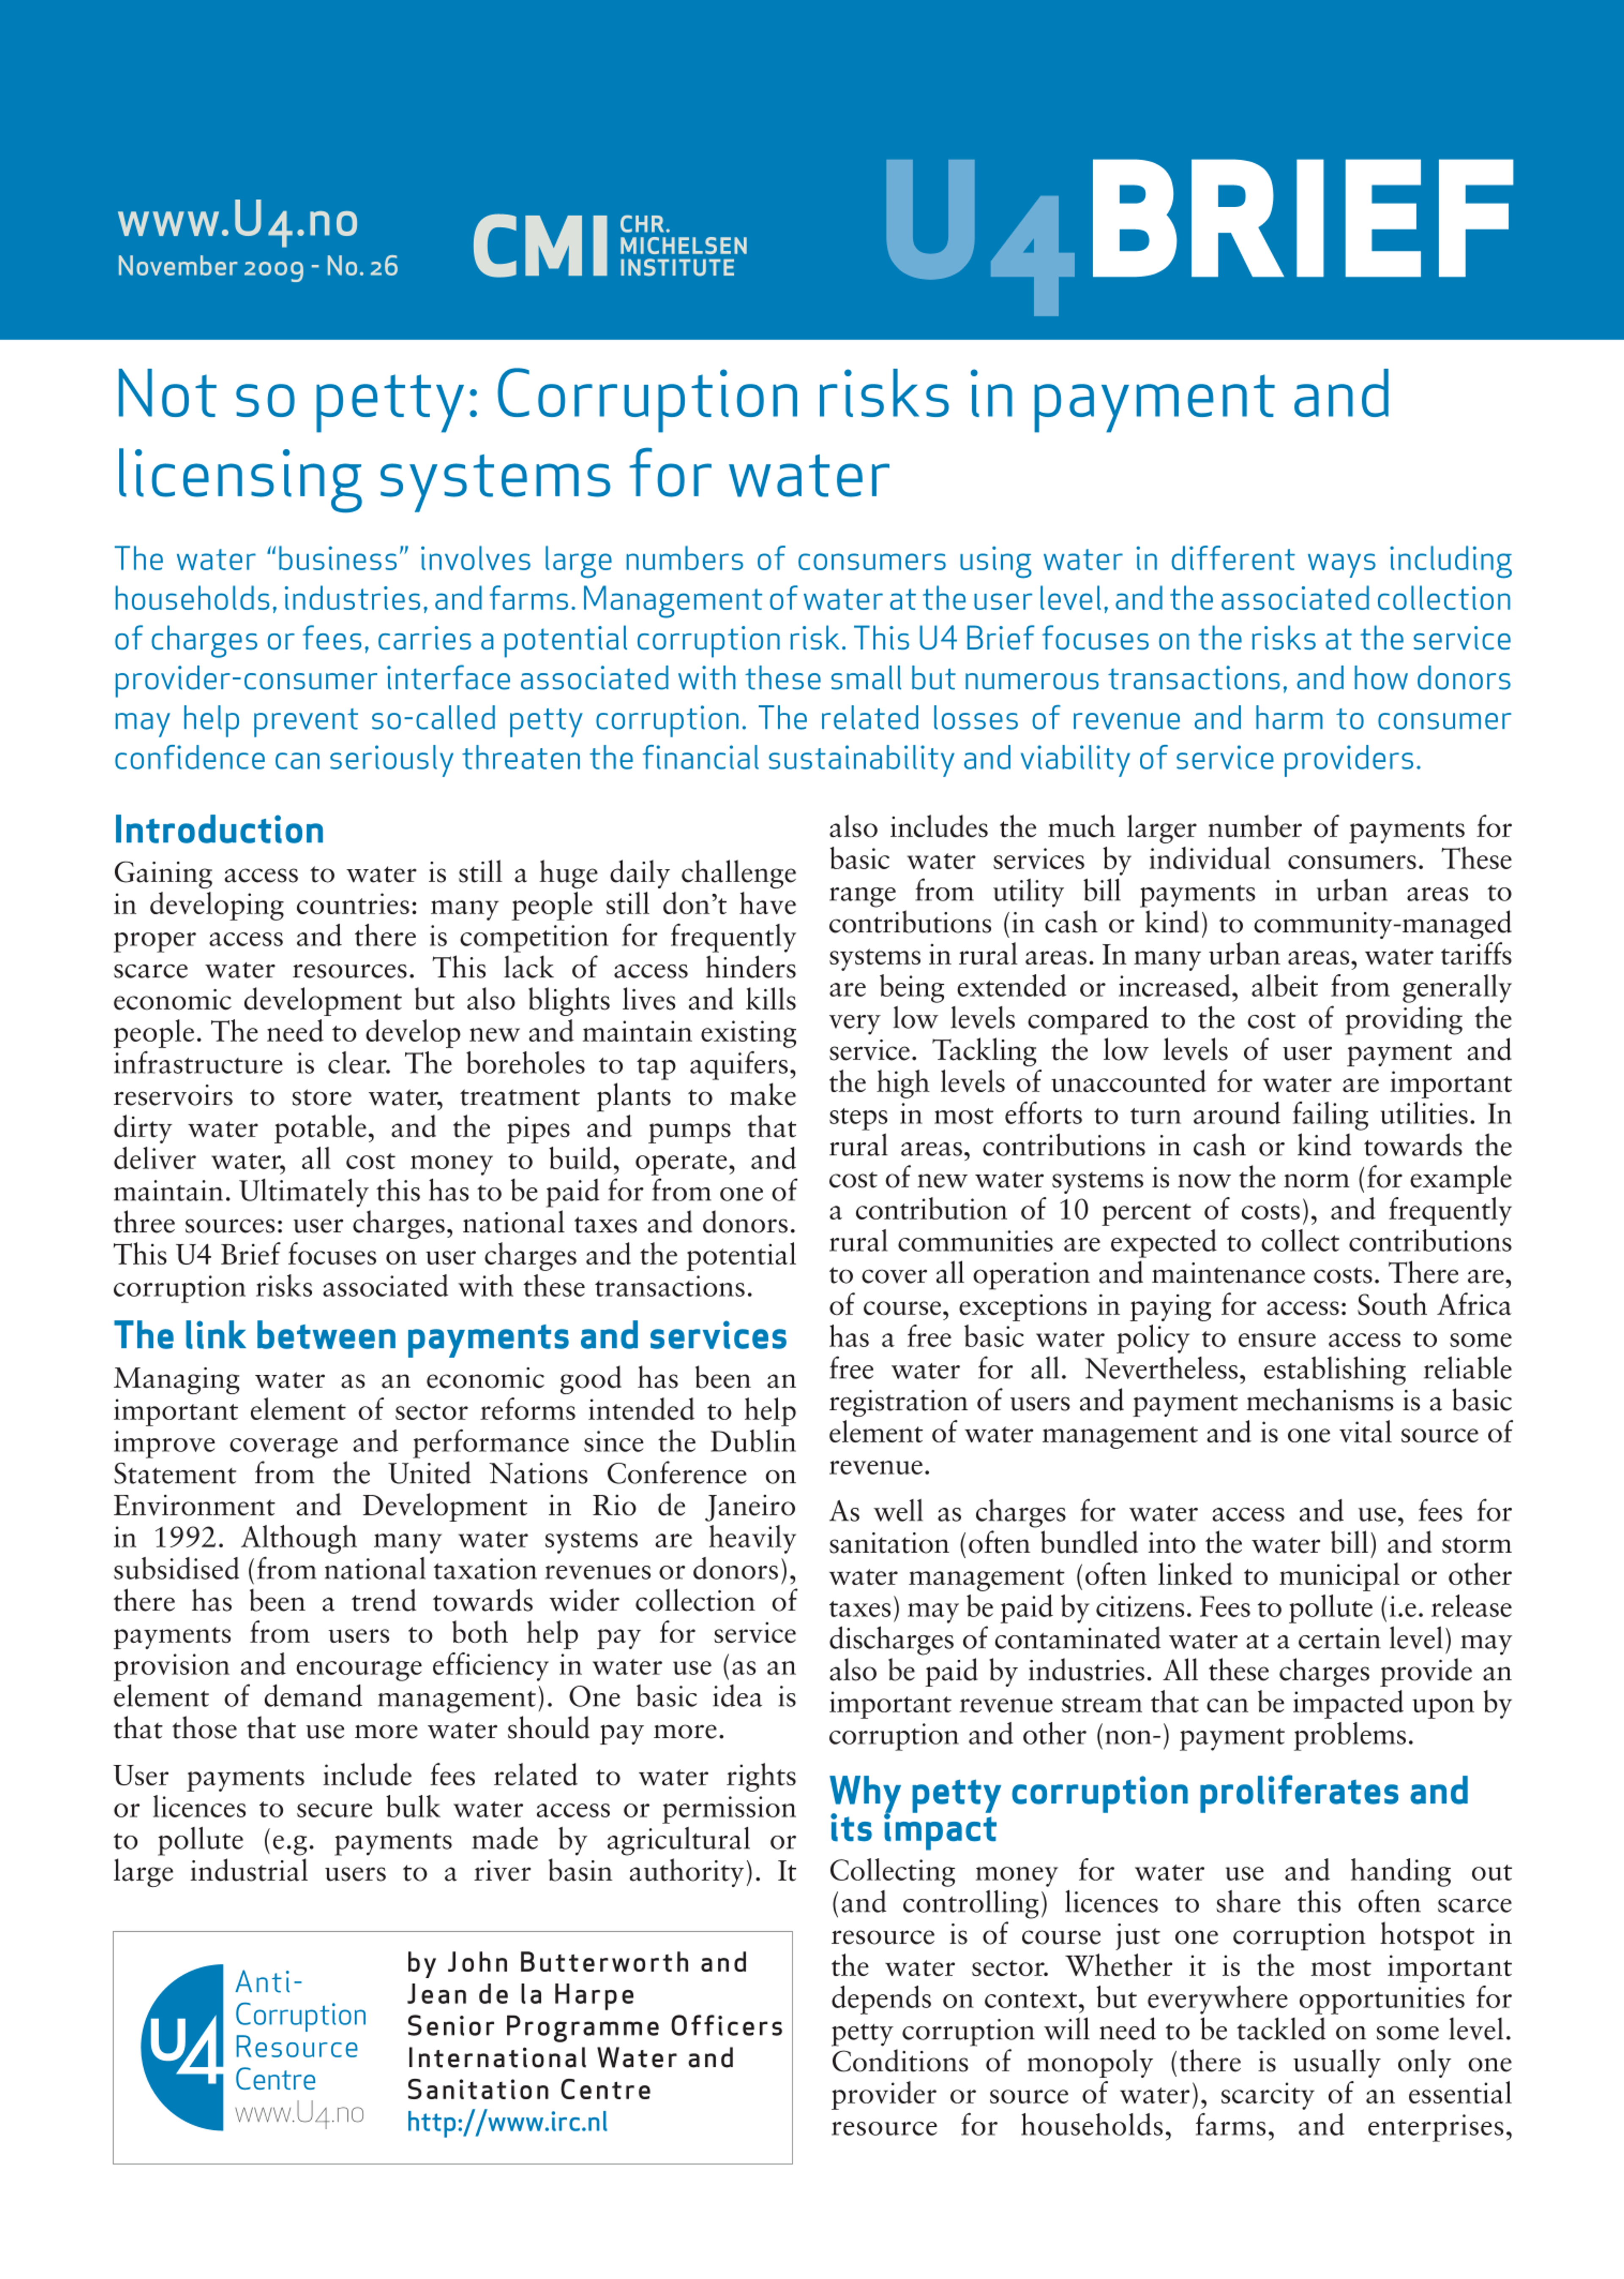 Not so petty: Corruption risks in payment and licensing systems for water